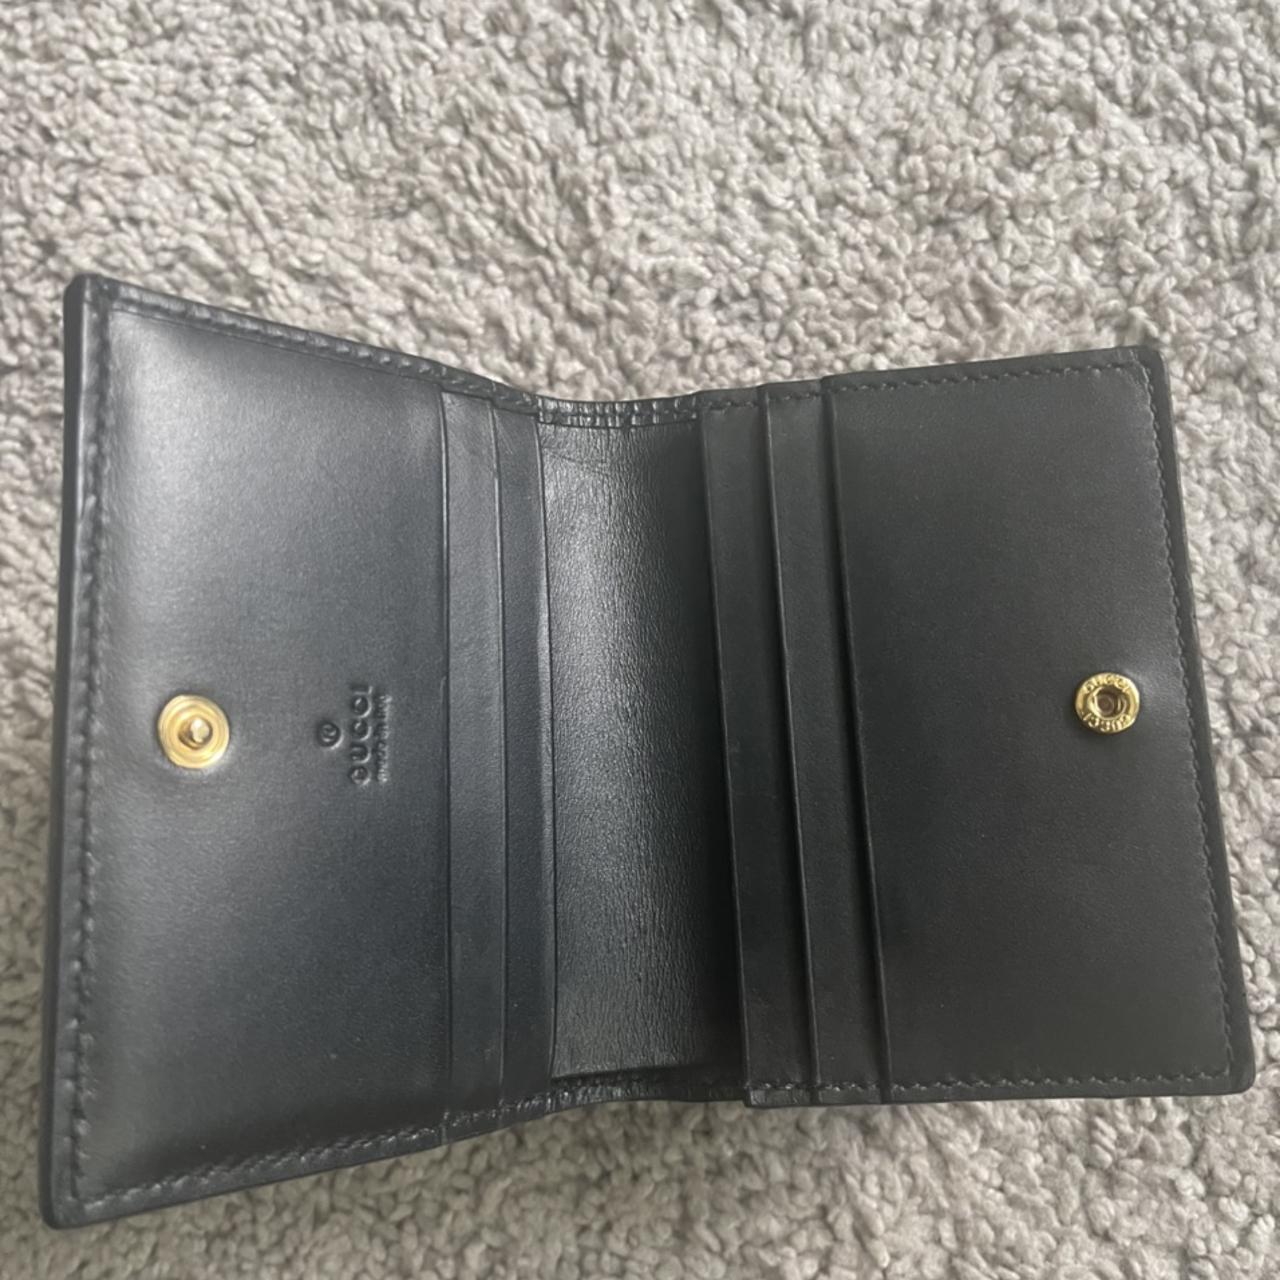 Authentic Gucci embossed bifold wallet…comes with... - Depop